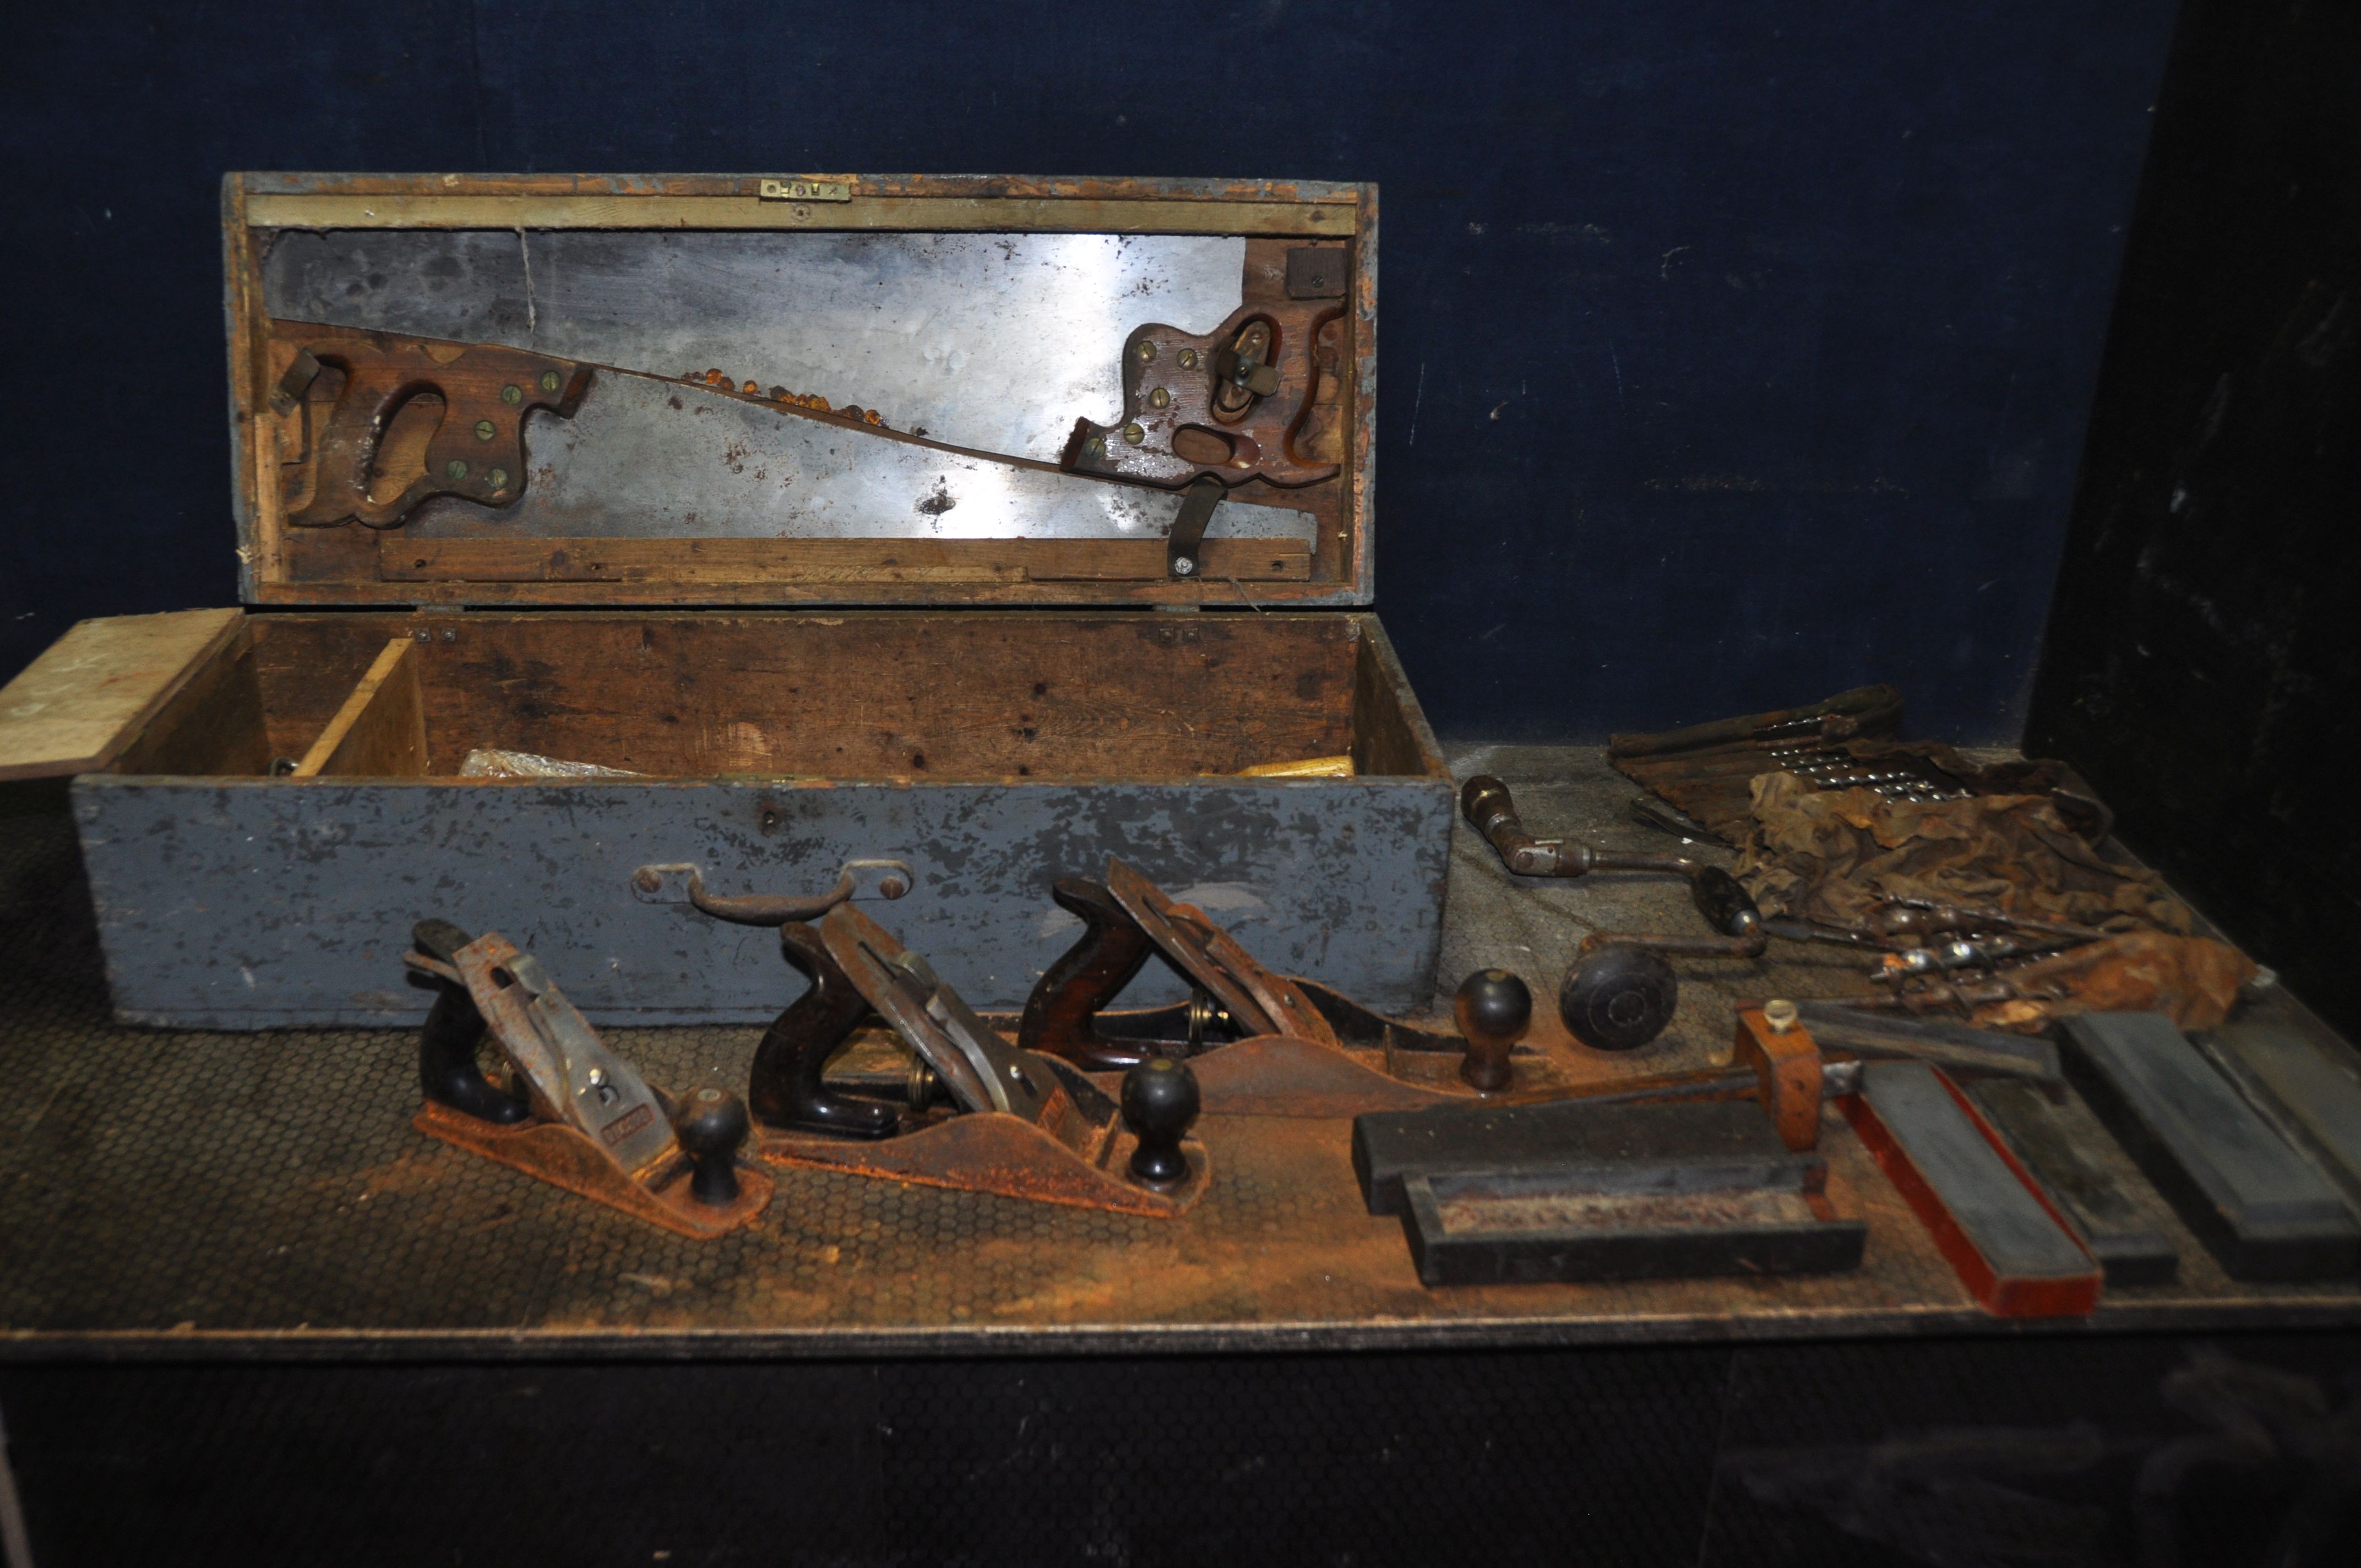 A VINTAGE CARPENTERS TOOLBOX CONTAINING TOOLS including a Stanley No6 and a No 4 1/2 planes, a